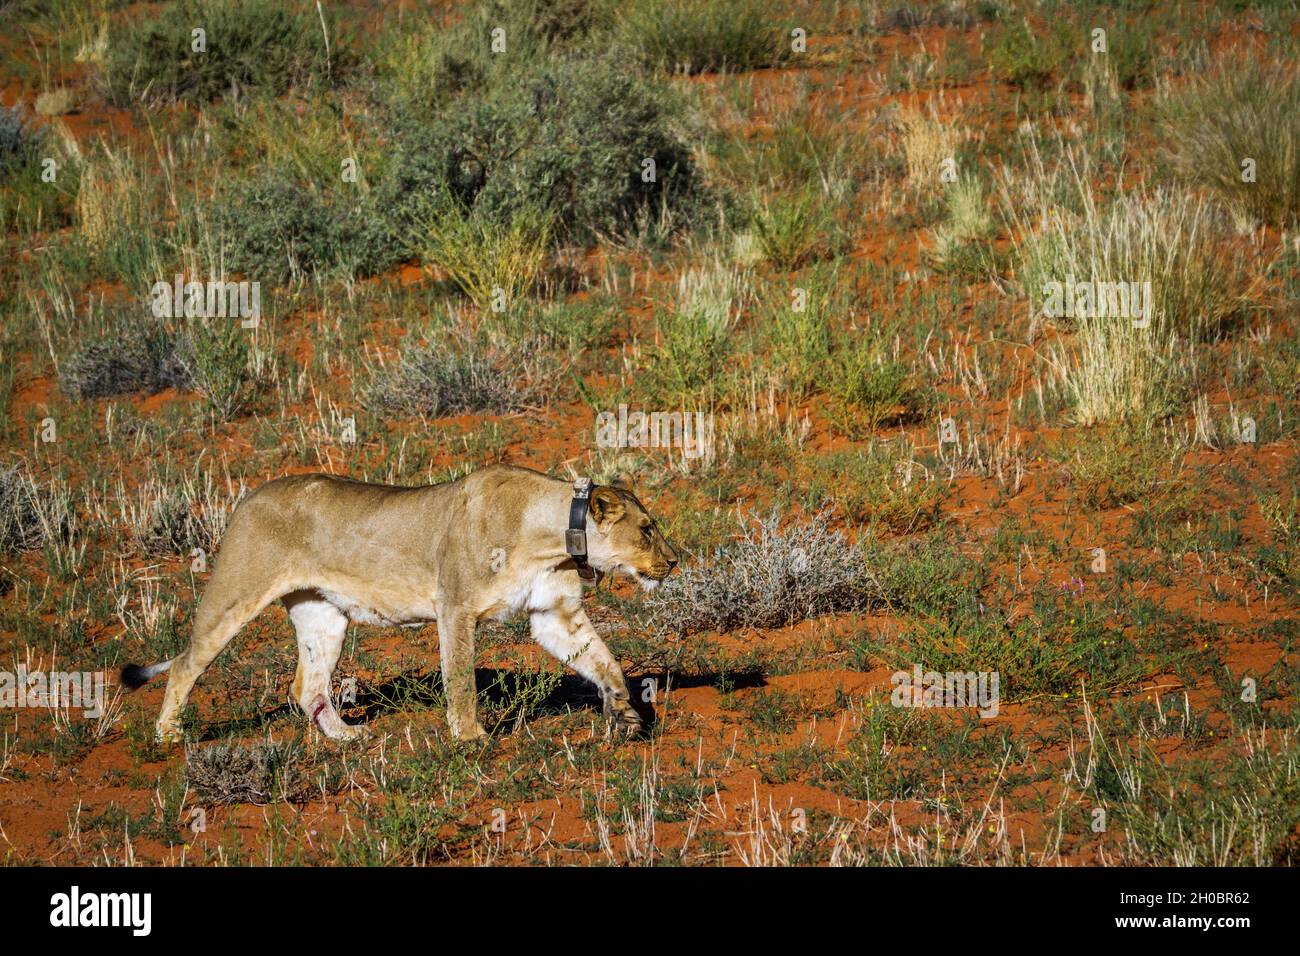 African lioness (Panthera leo) with tracking collar walking in Kgalagadi transfrontier park, South Africa Stock Photo